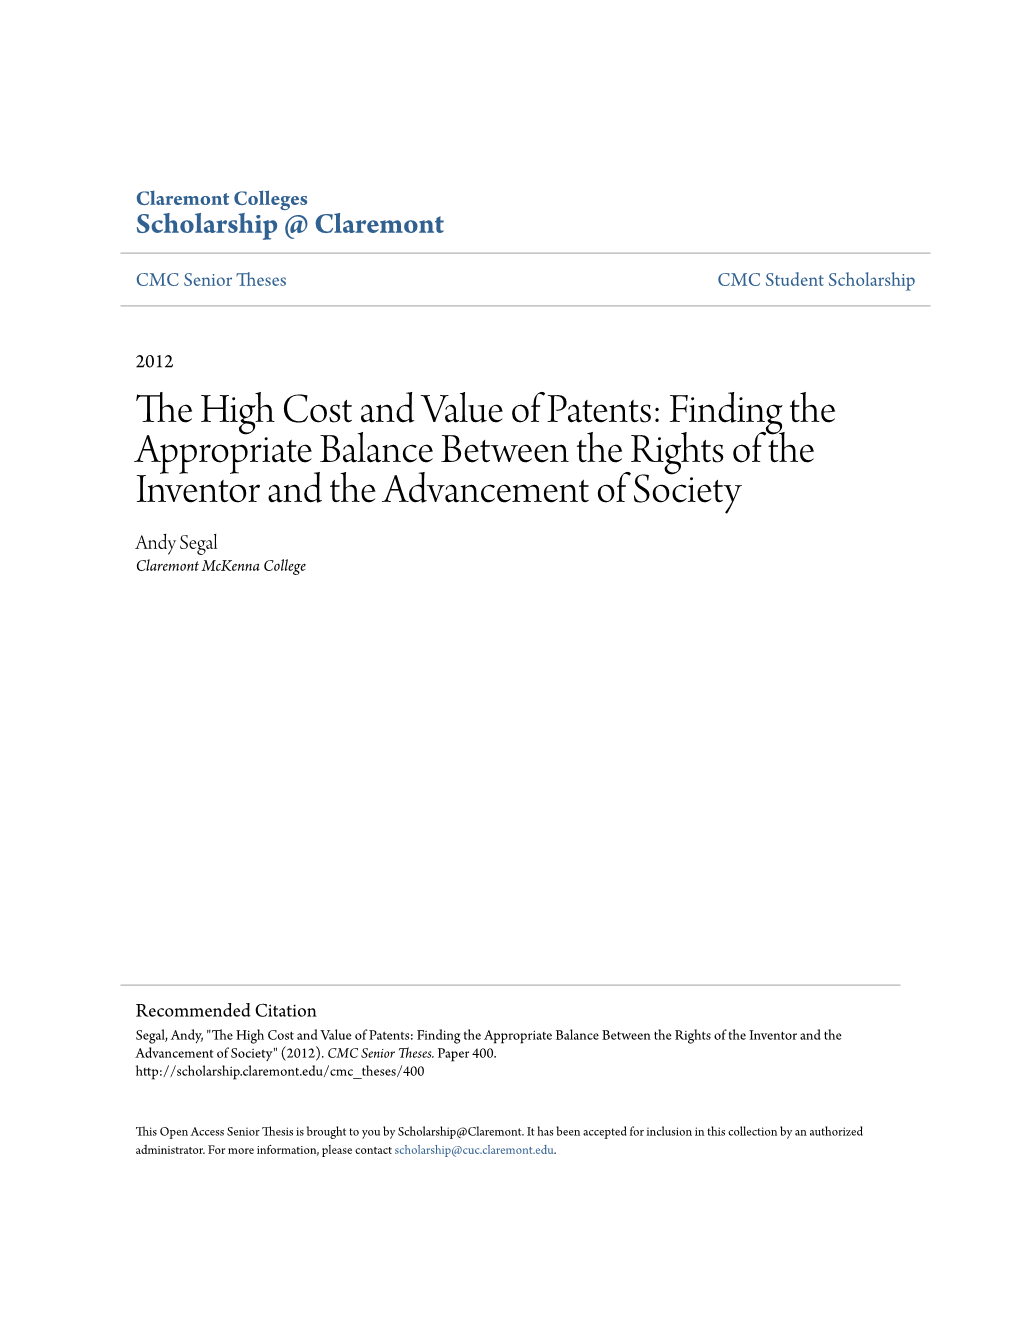 The High Cost and Value of Patents: Finding the Appropriate Balance Between the Rights of the Inventor and the Advancement of Society